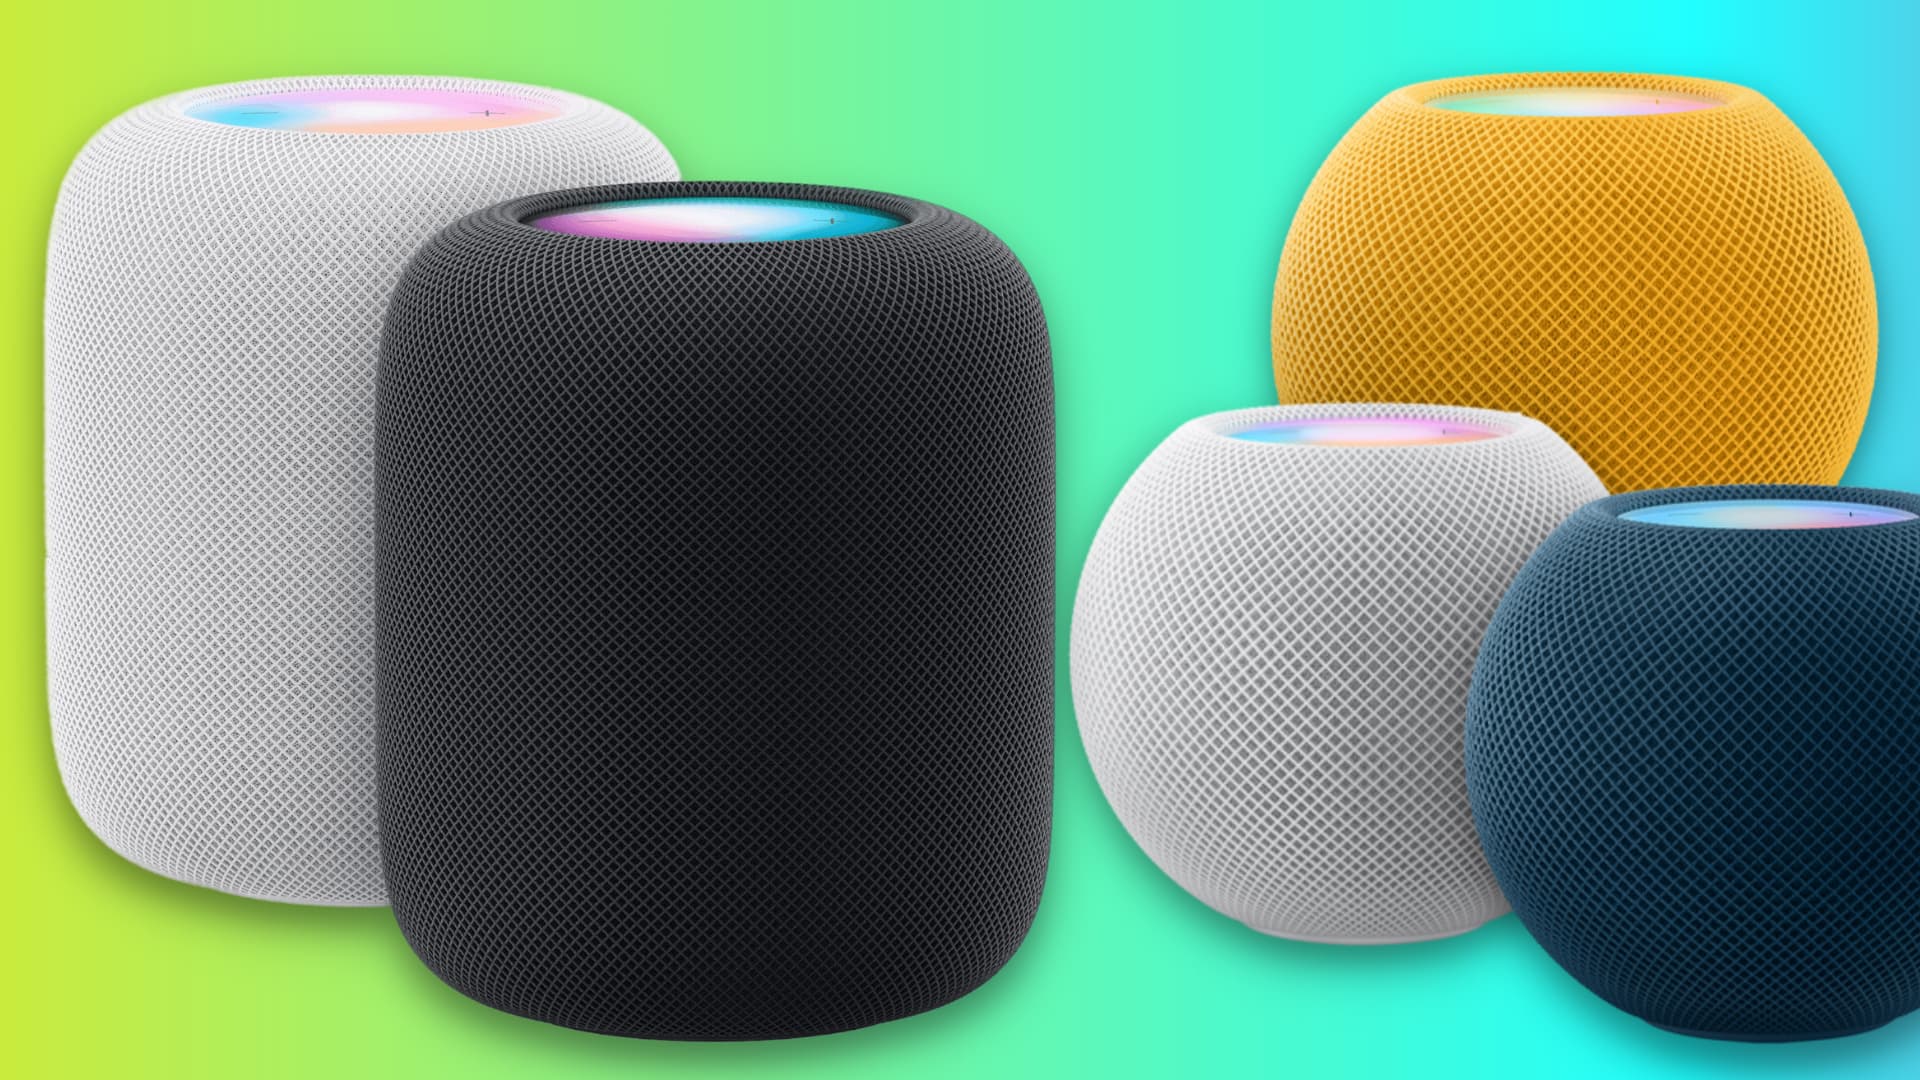 Two HomePod 2nd generation in white and black colors and three HomePod mini in white, blue, and yellow